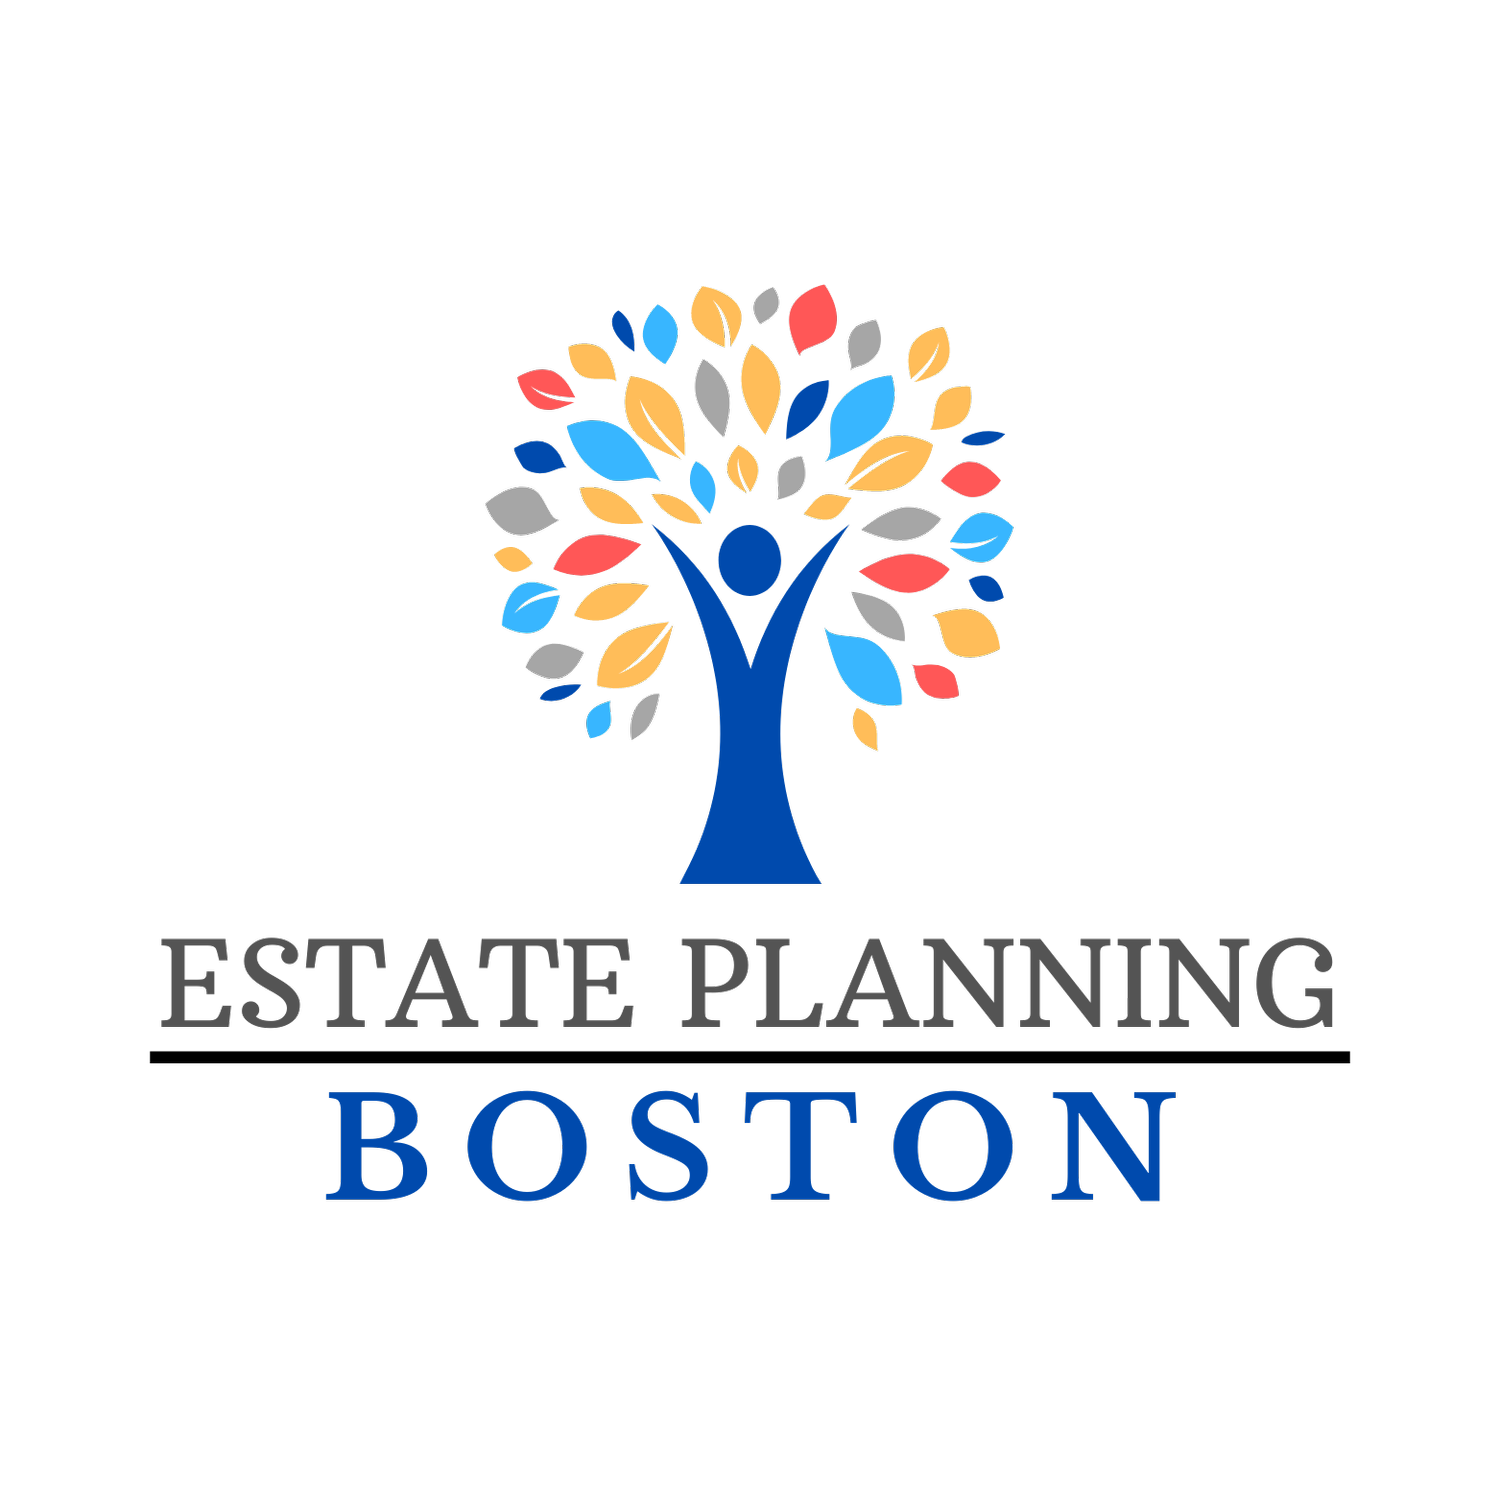 Estate Planning Boston - Expertise and Decency for small or large estates.